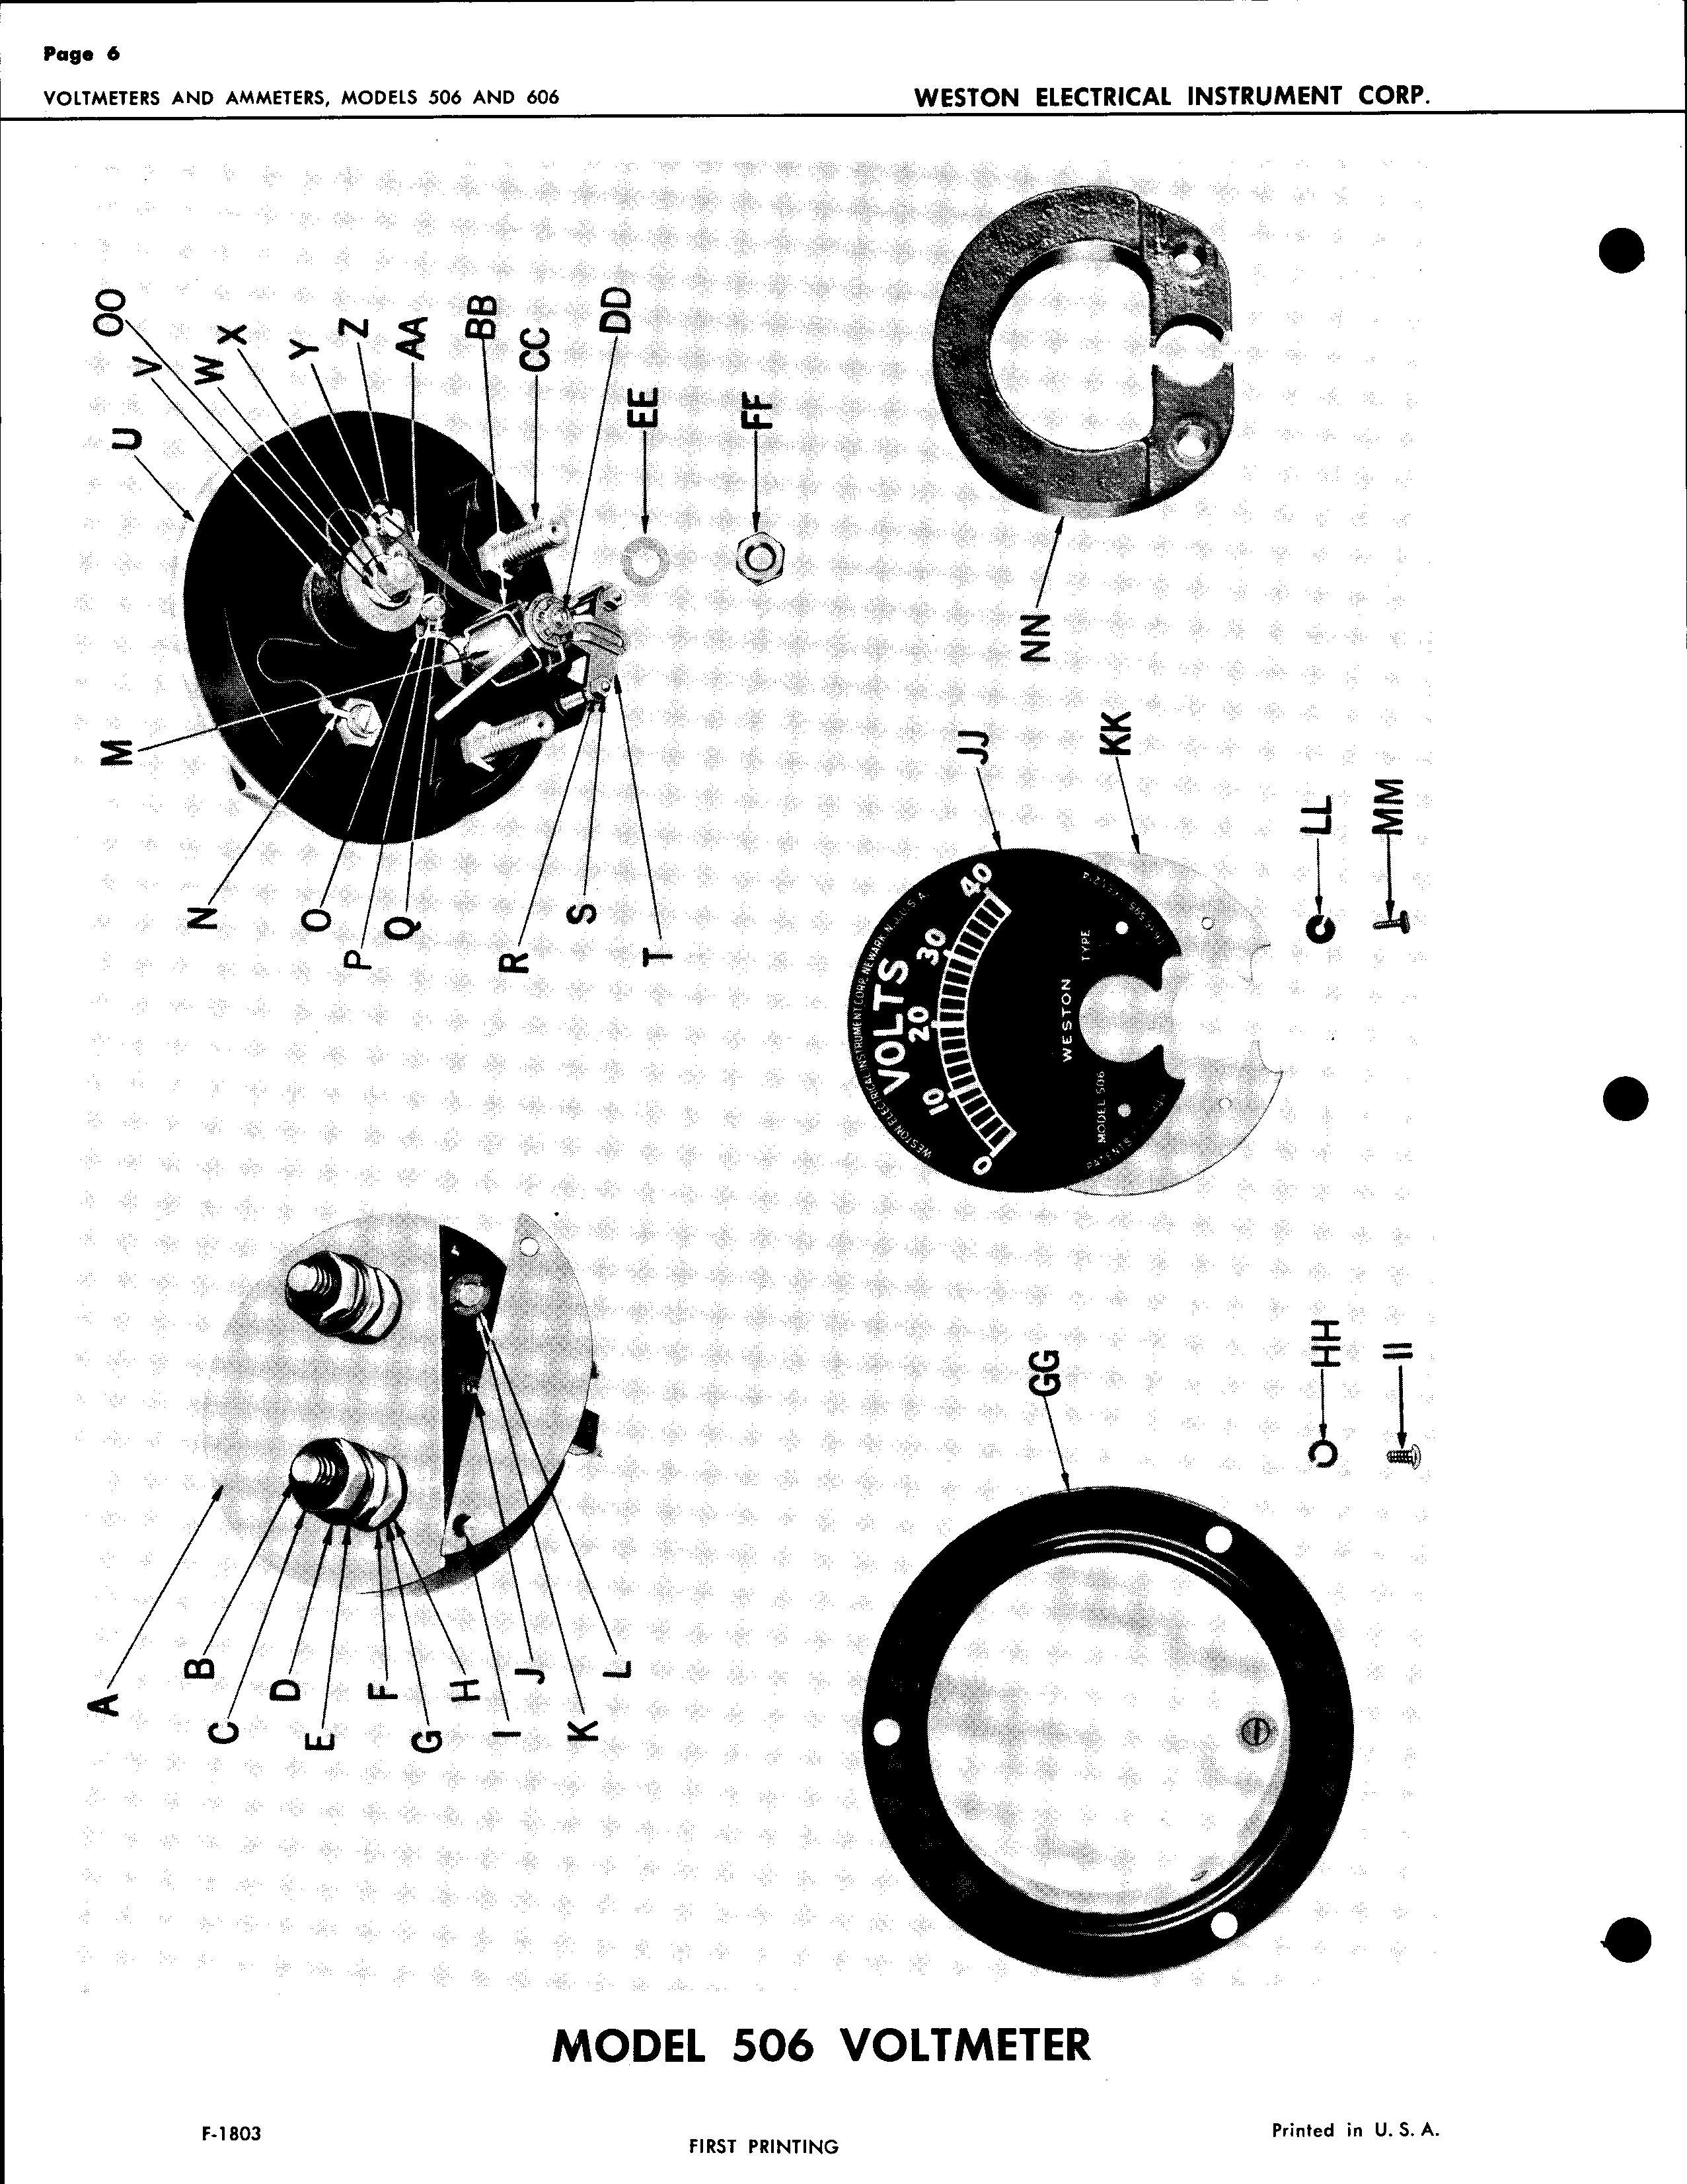 Sample page 6 from AirCorps Library document: Service Instructions for Models 506 & 606 Voltmeters and Ammeters